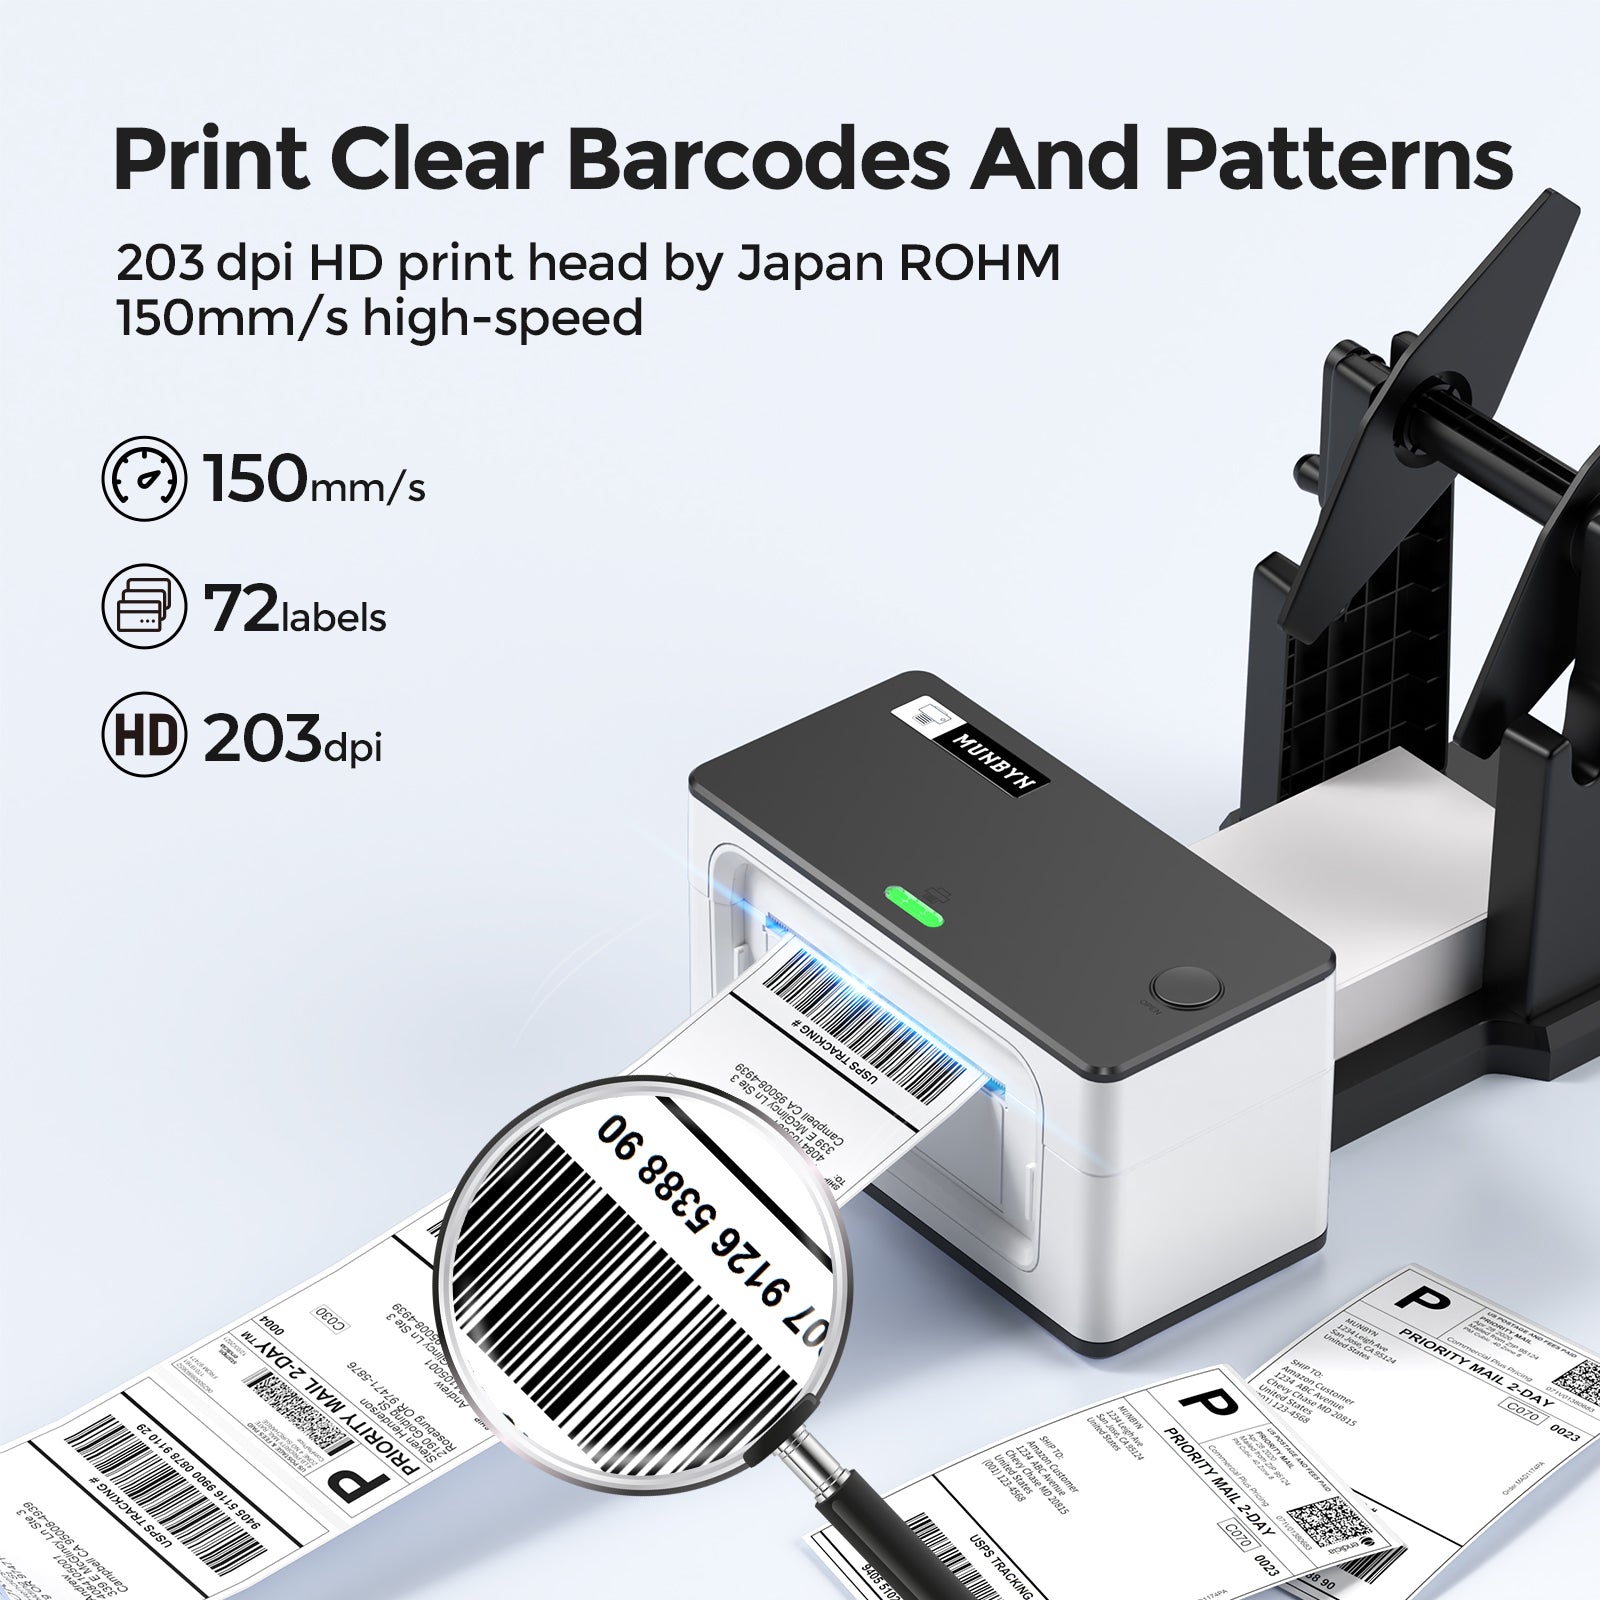 Shipping Label Printer, 4x6 Label Printer for Shipping Packages, USB Thermal Printer for Shipping Labels Home Small Business,Munbyn